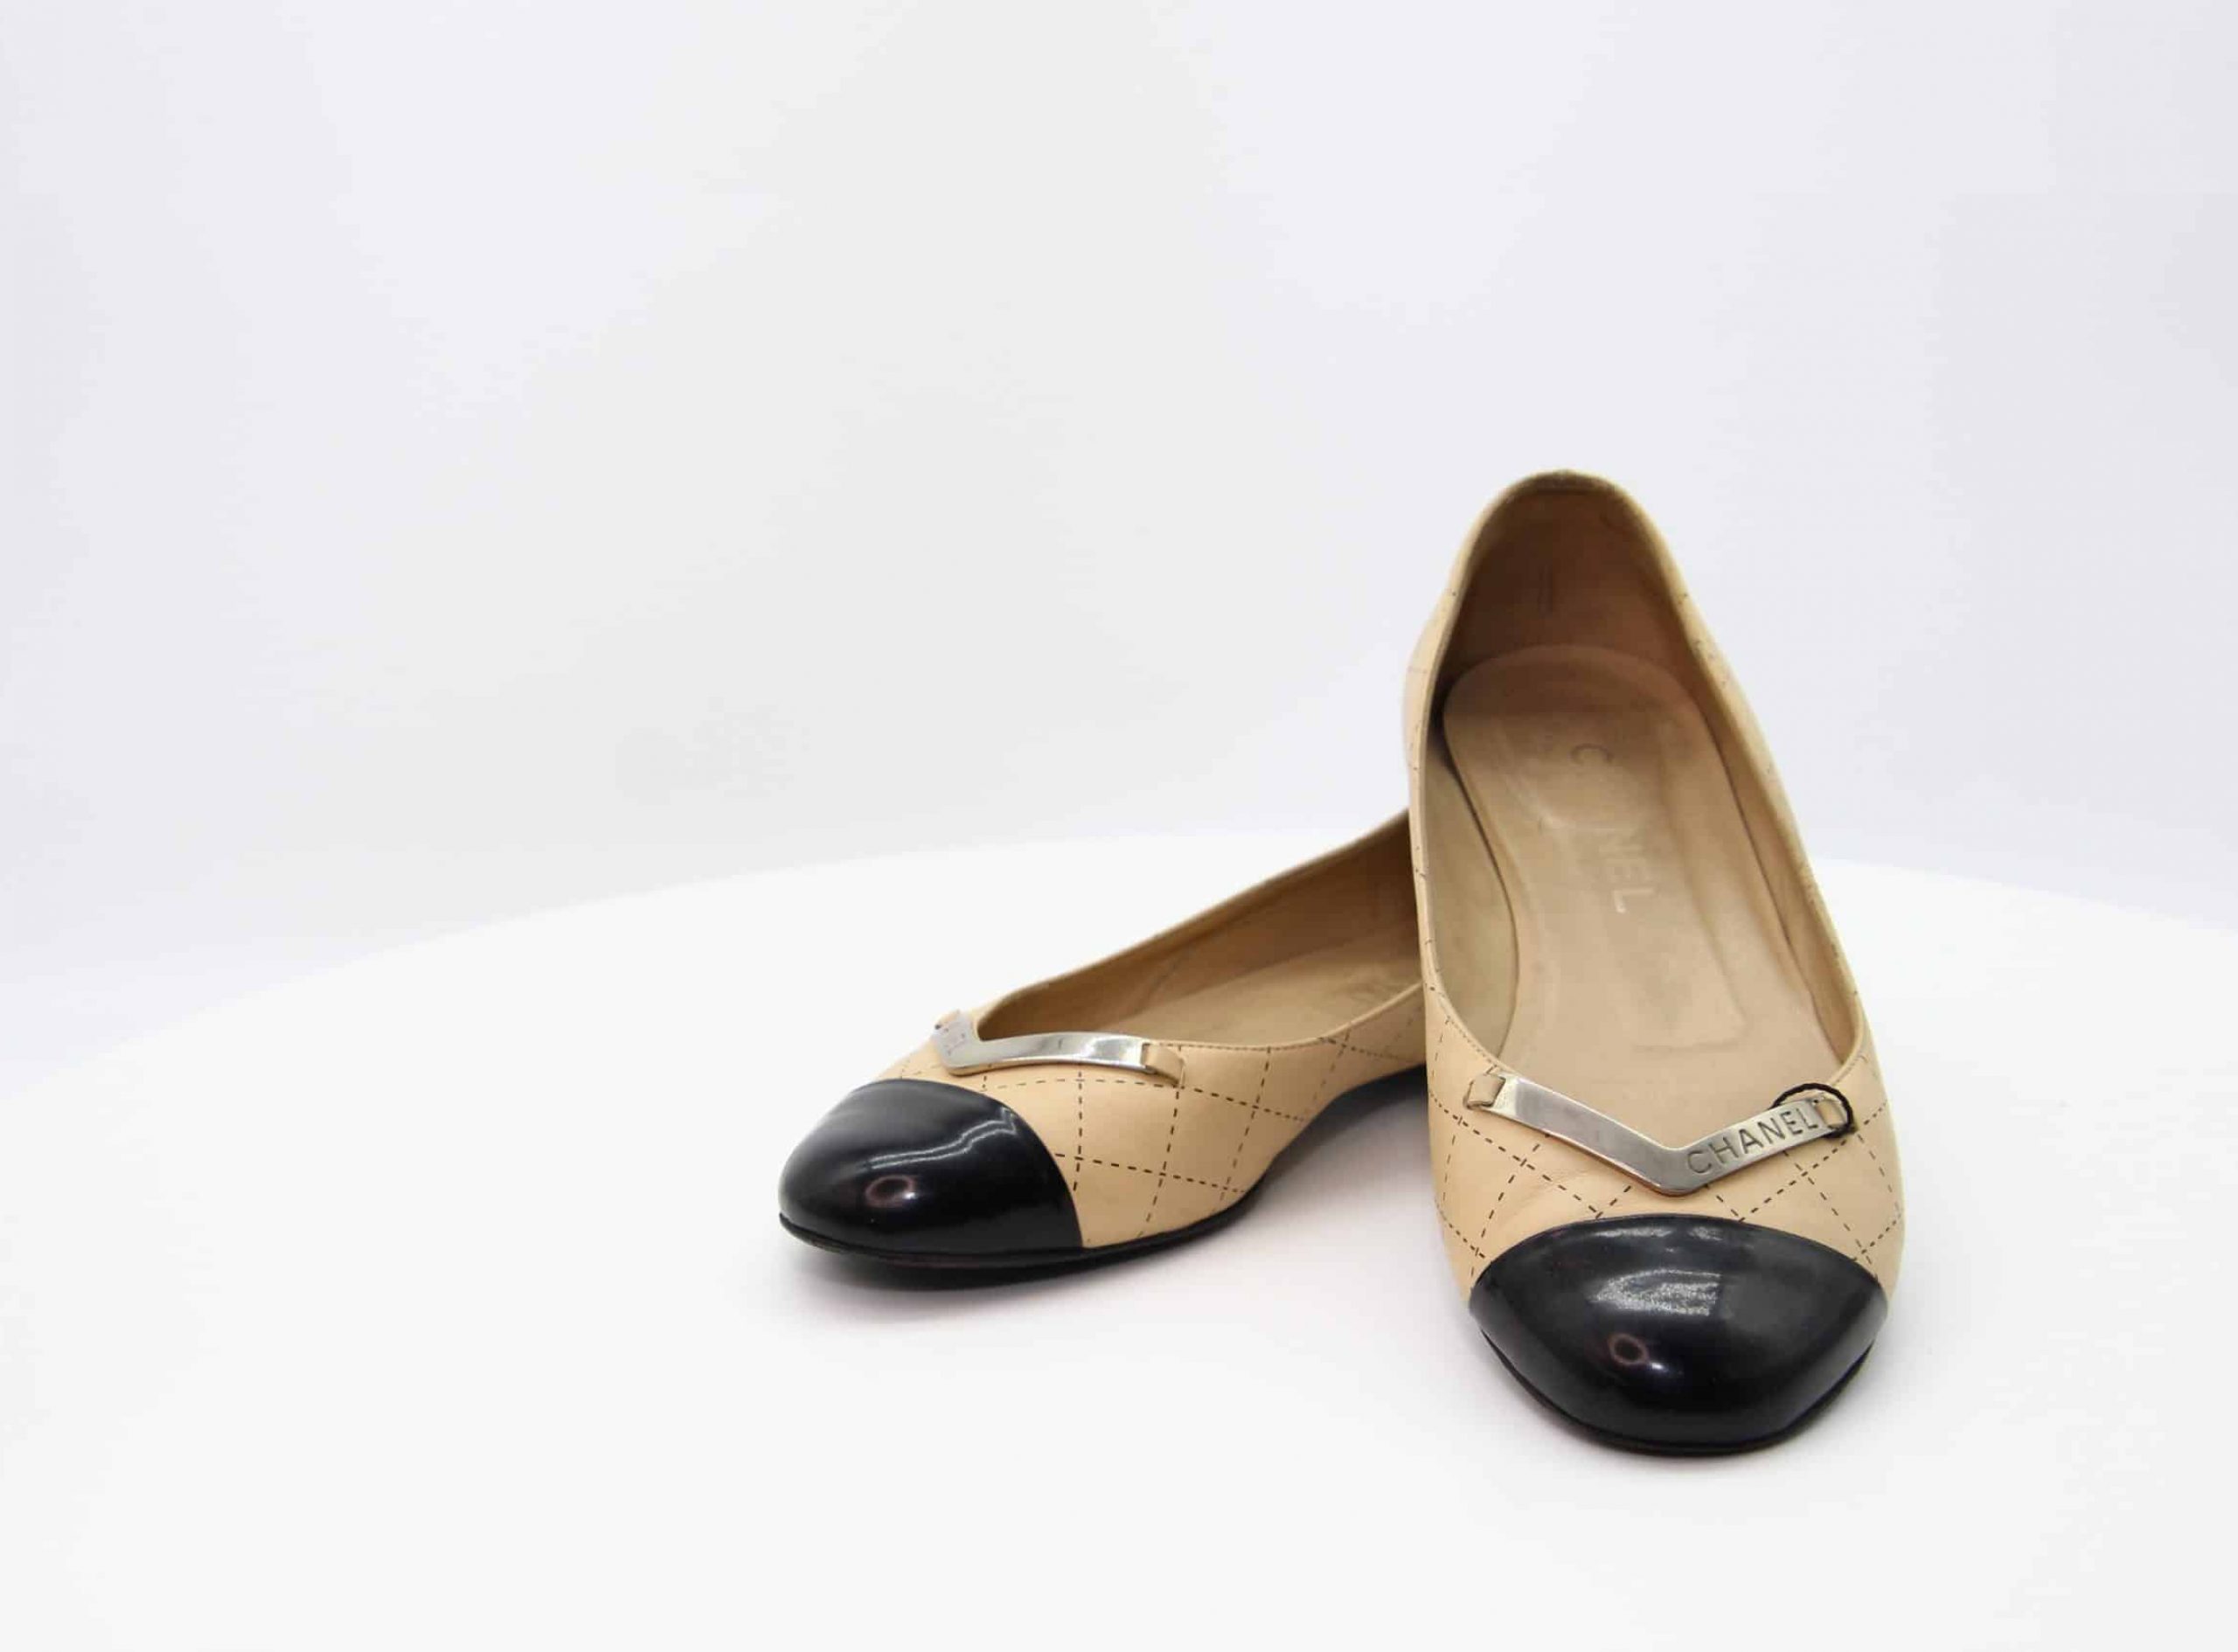 Chanel Vintage Two Tone Patent Leather Ballet Flats